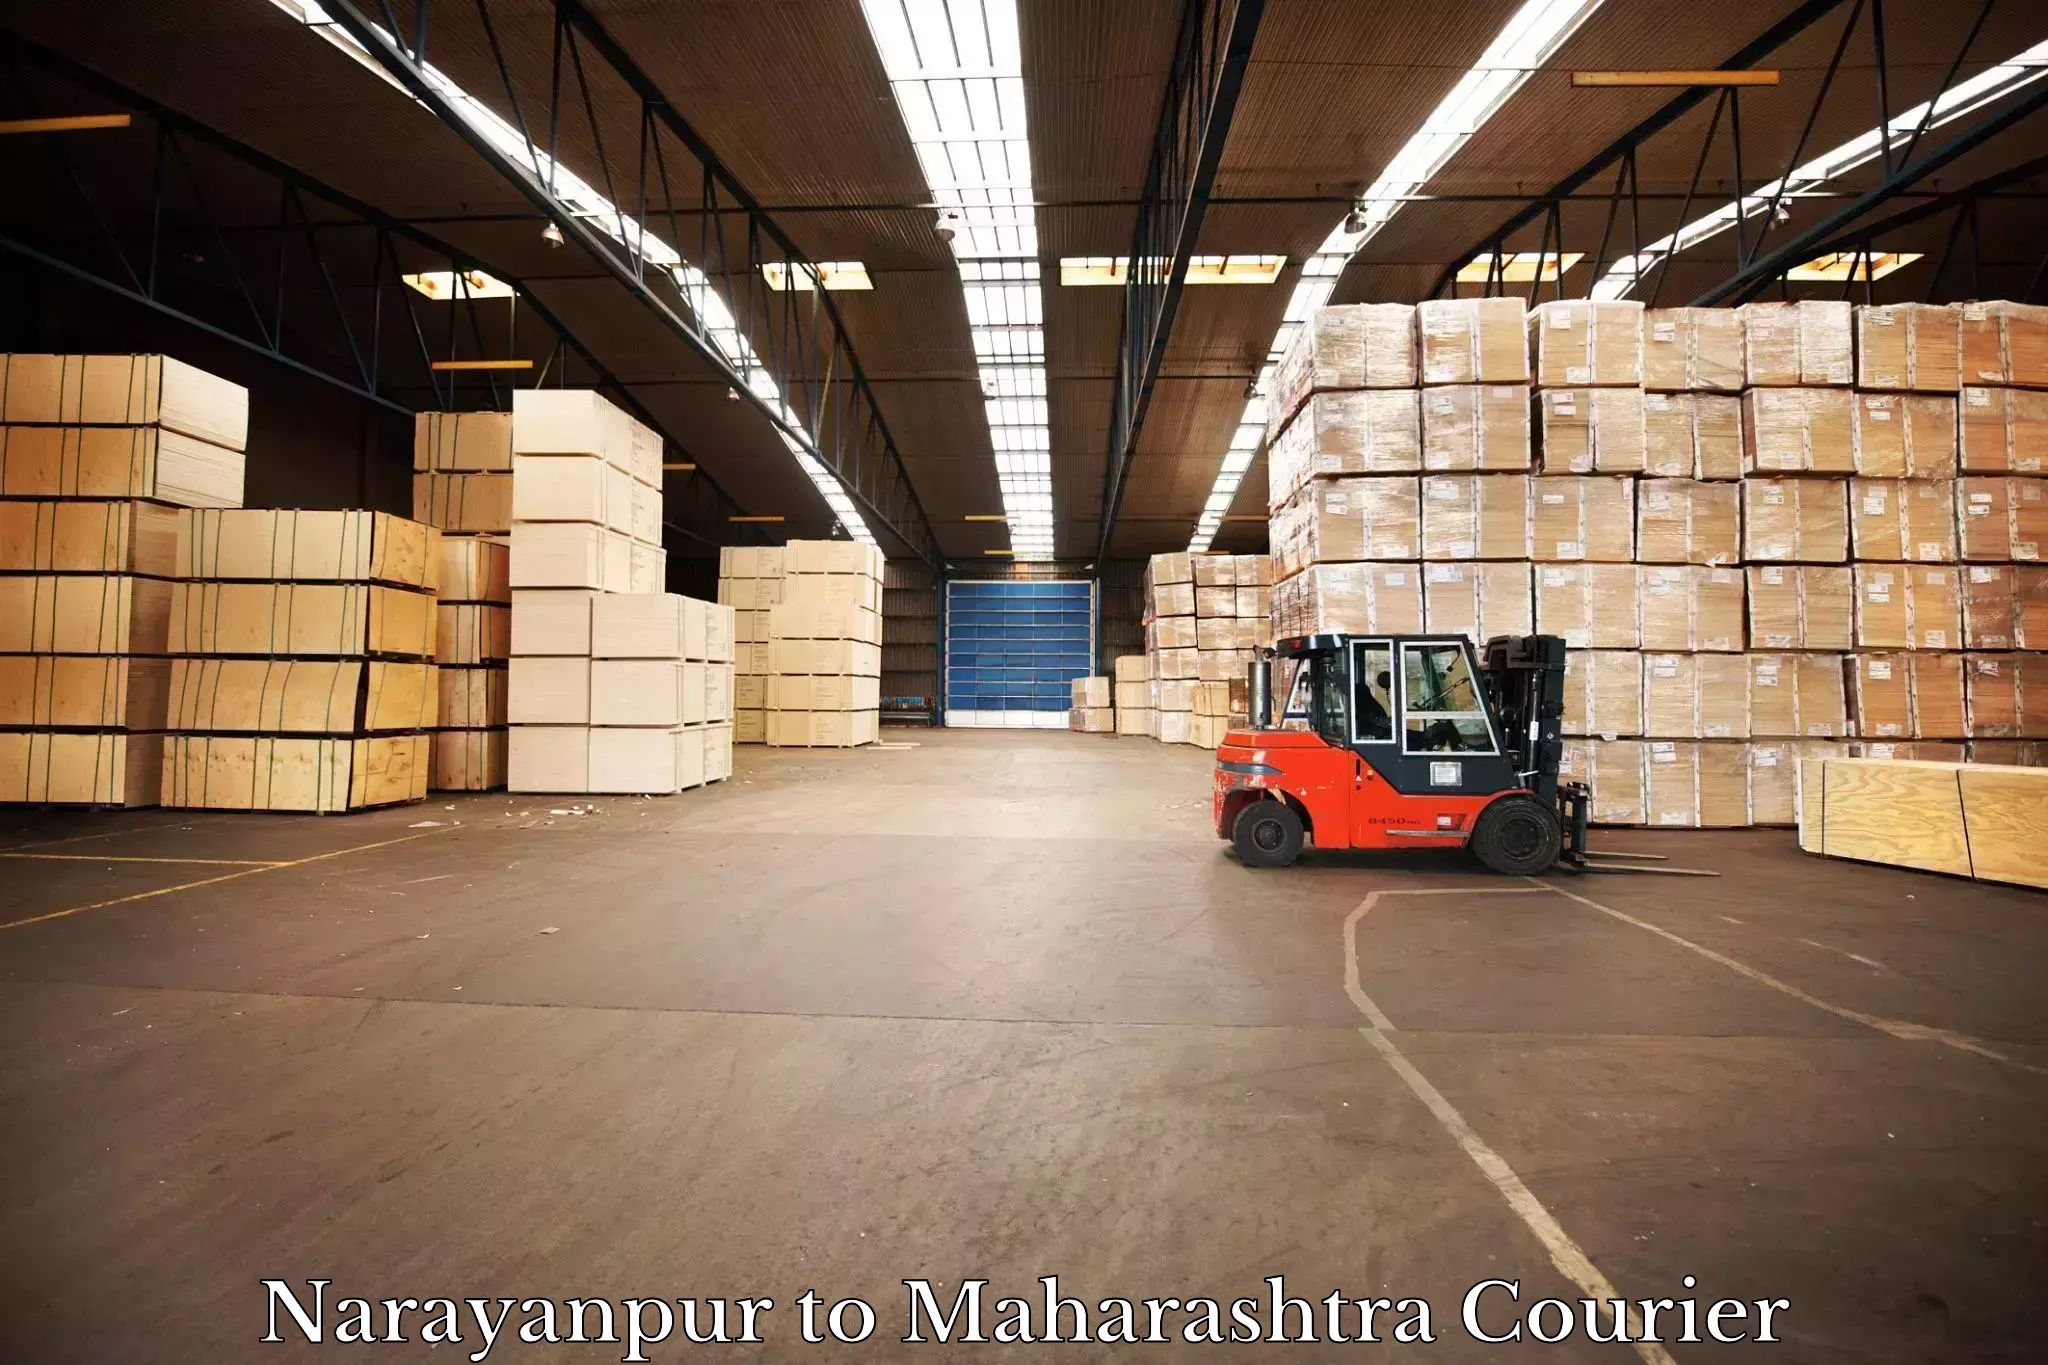 Express delivery capabilities Narayanpur to Aurangabad